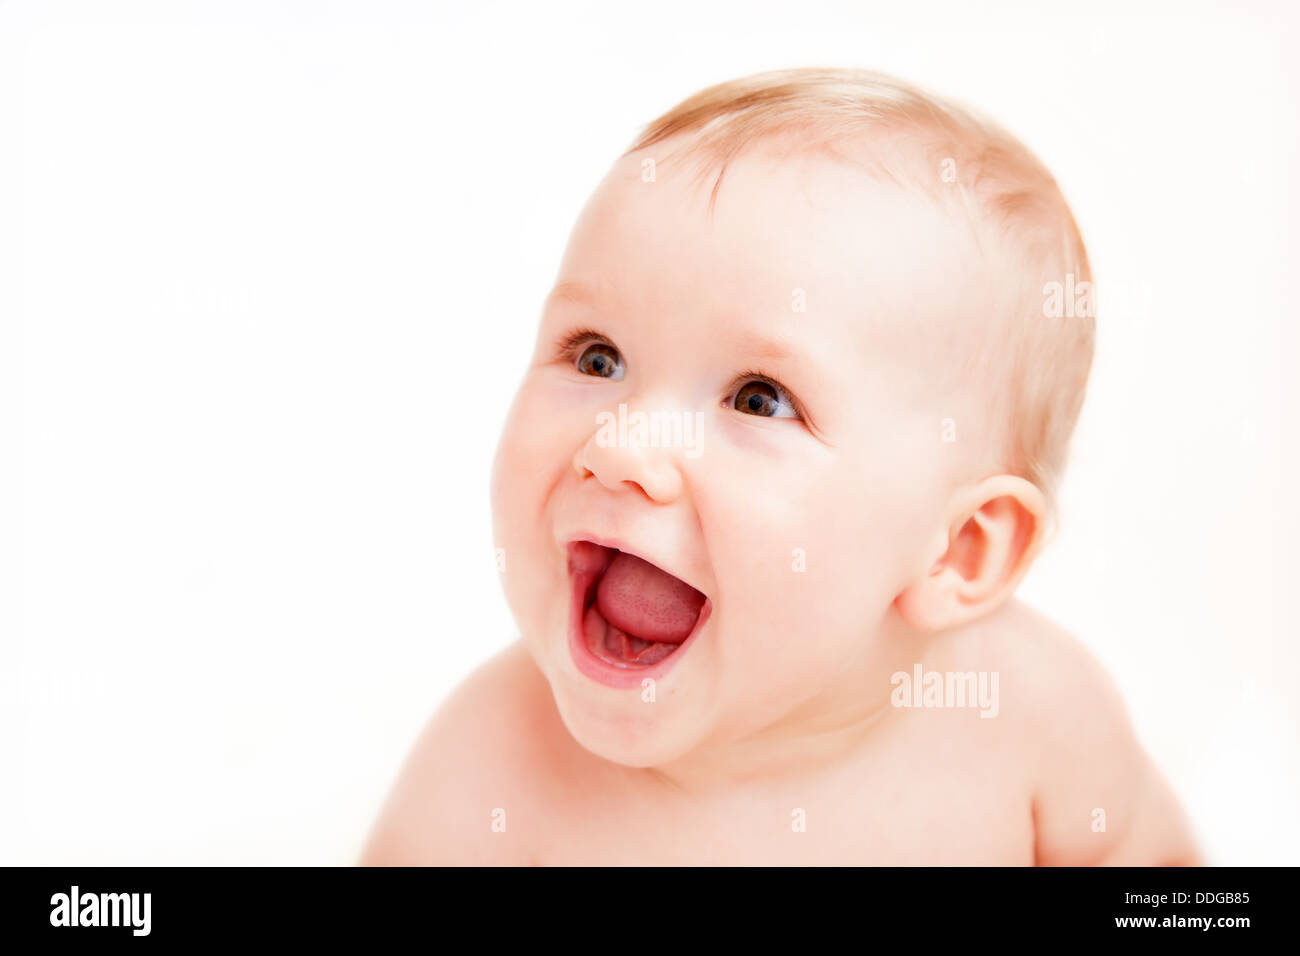 Excited baby with laughing face Stock Photo